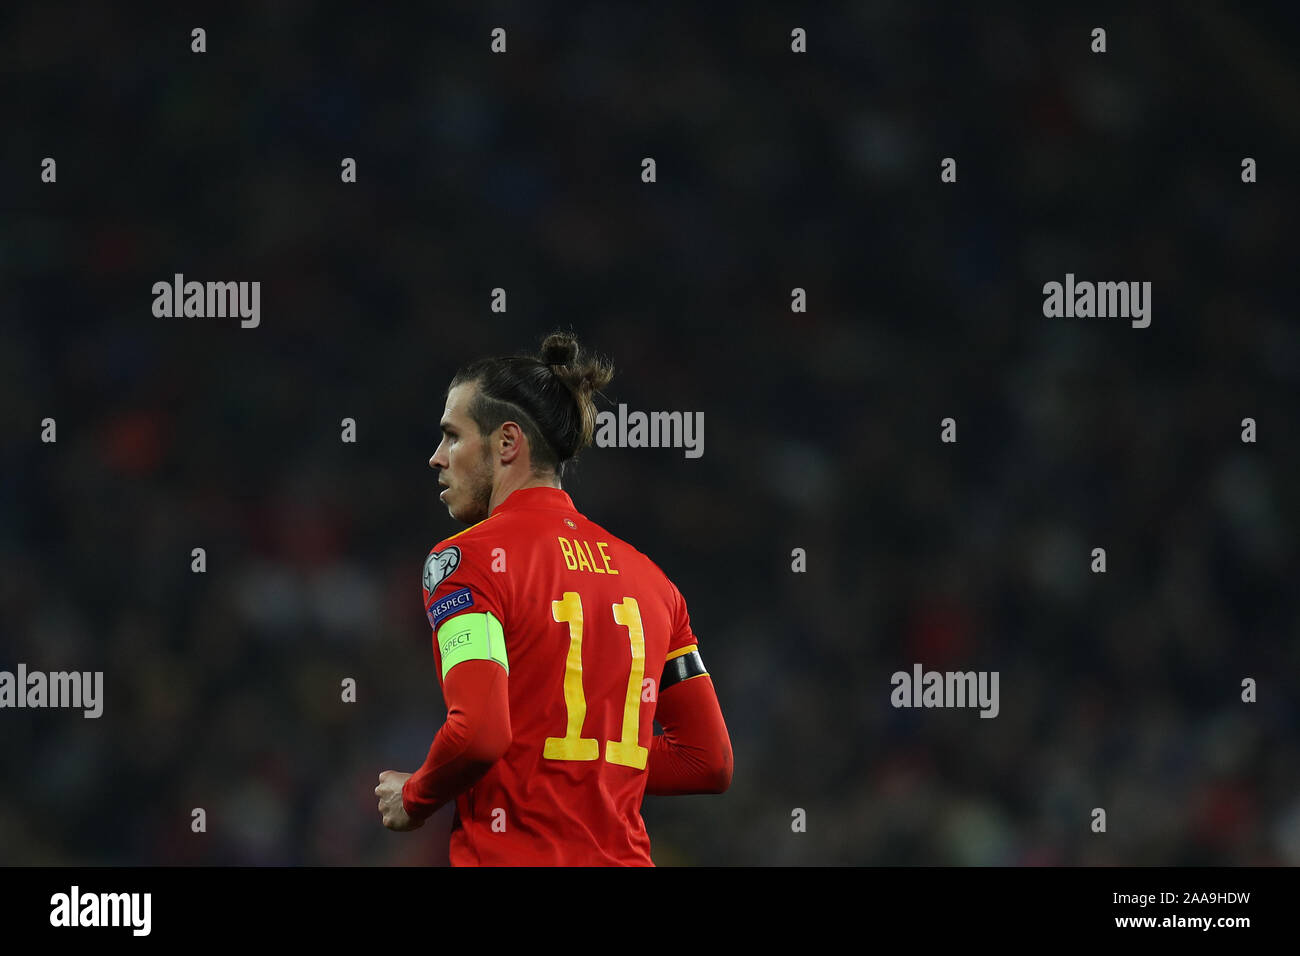 Gareth Bale of Wales in action. UEFA Euro 2020 qualifier group E match, Wales v Hungary at the Cardiff city Stadium in Cardiff , South Wales on Tuesday 19th November 2019. pic by Andrew Orchard/Andrew Orchard sports photography/Alamy live News EDITORIAL USE ONLY Stock Photo